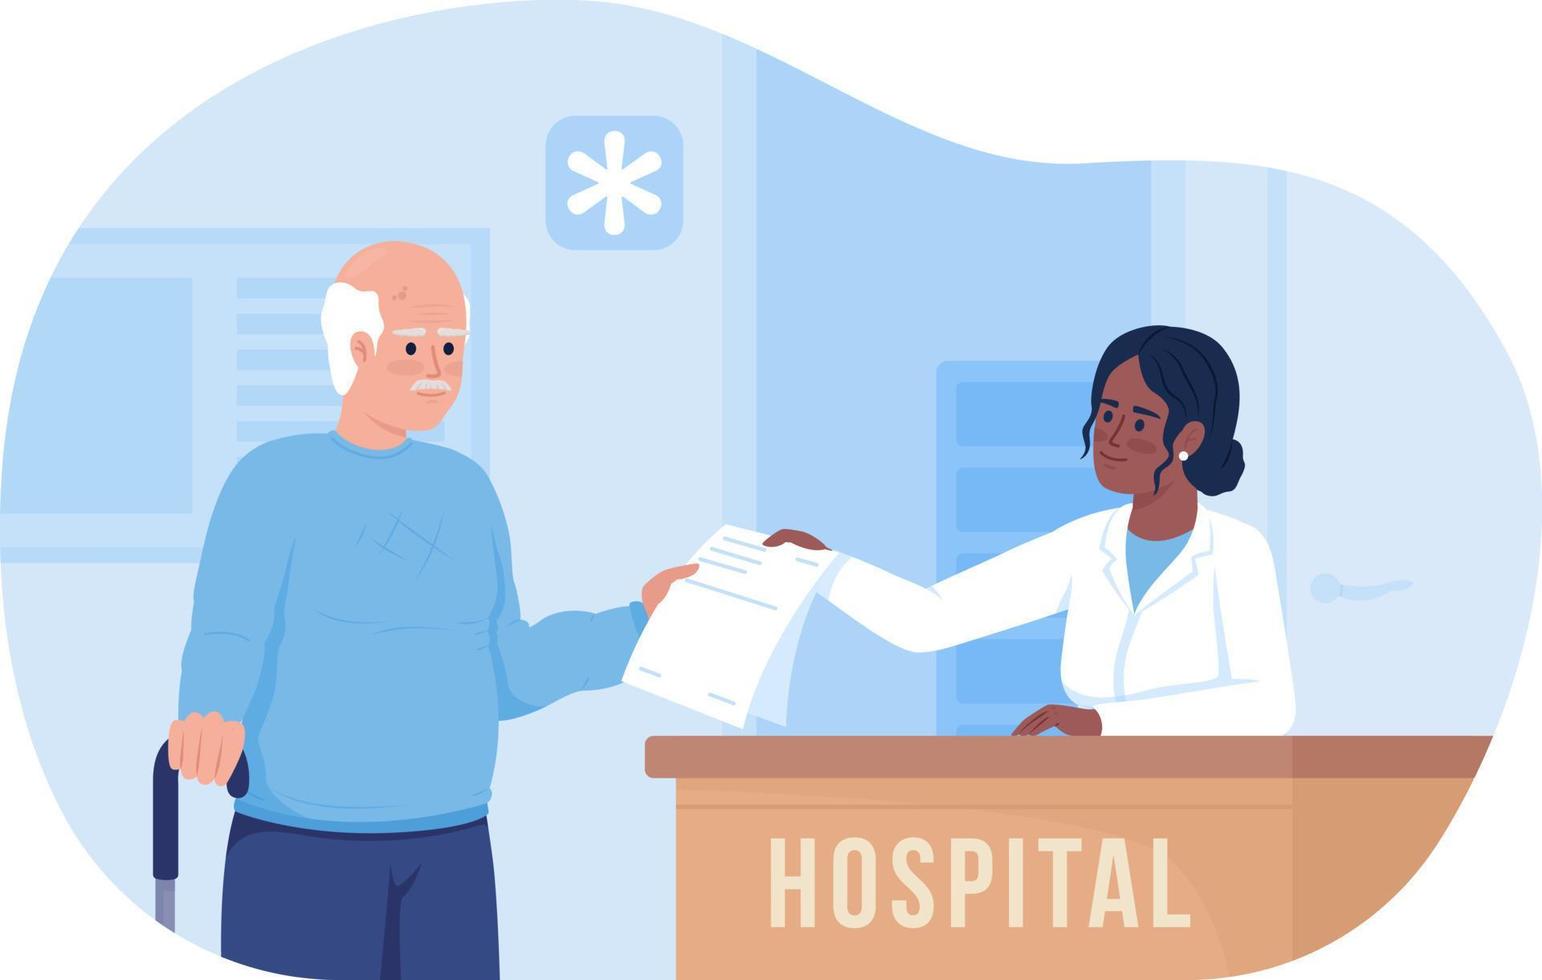 Senior man visiting hospital 2D vector isolated illustration. Healthcare service flat characters on cartoon background. Colourful editable scene for mobile, website, presentation